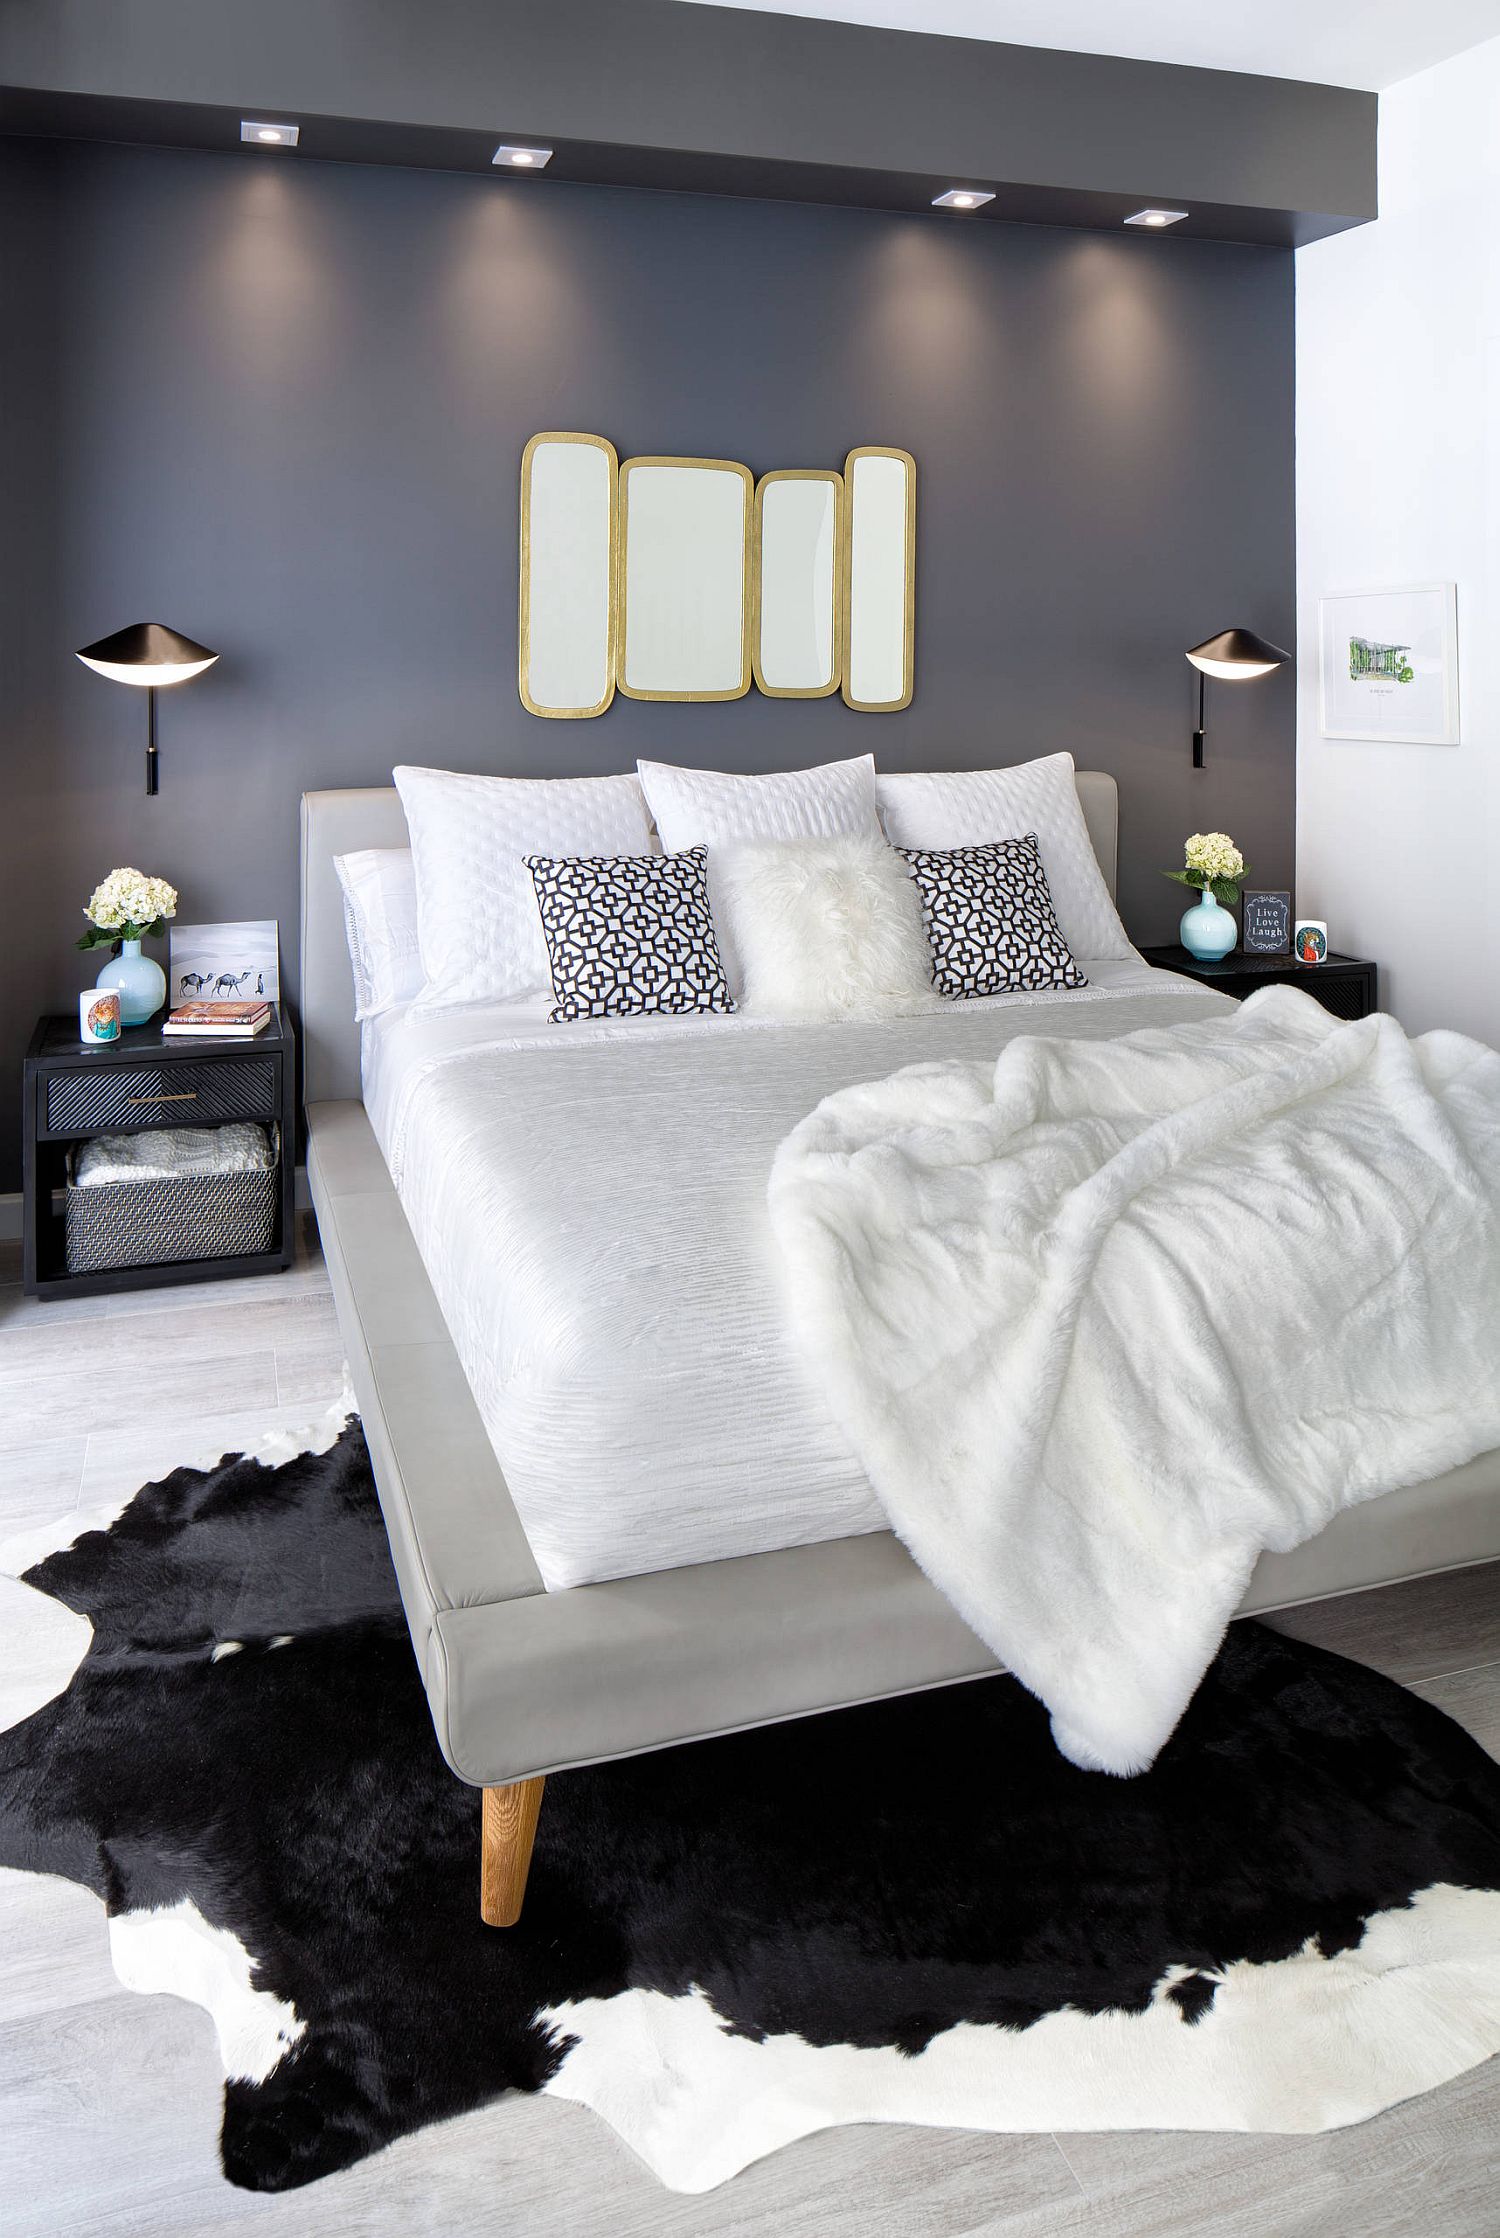 Custom-bedroom-with-space-savvy-design-and-a-dark-headboard-accent-wall